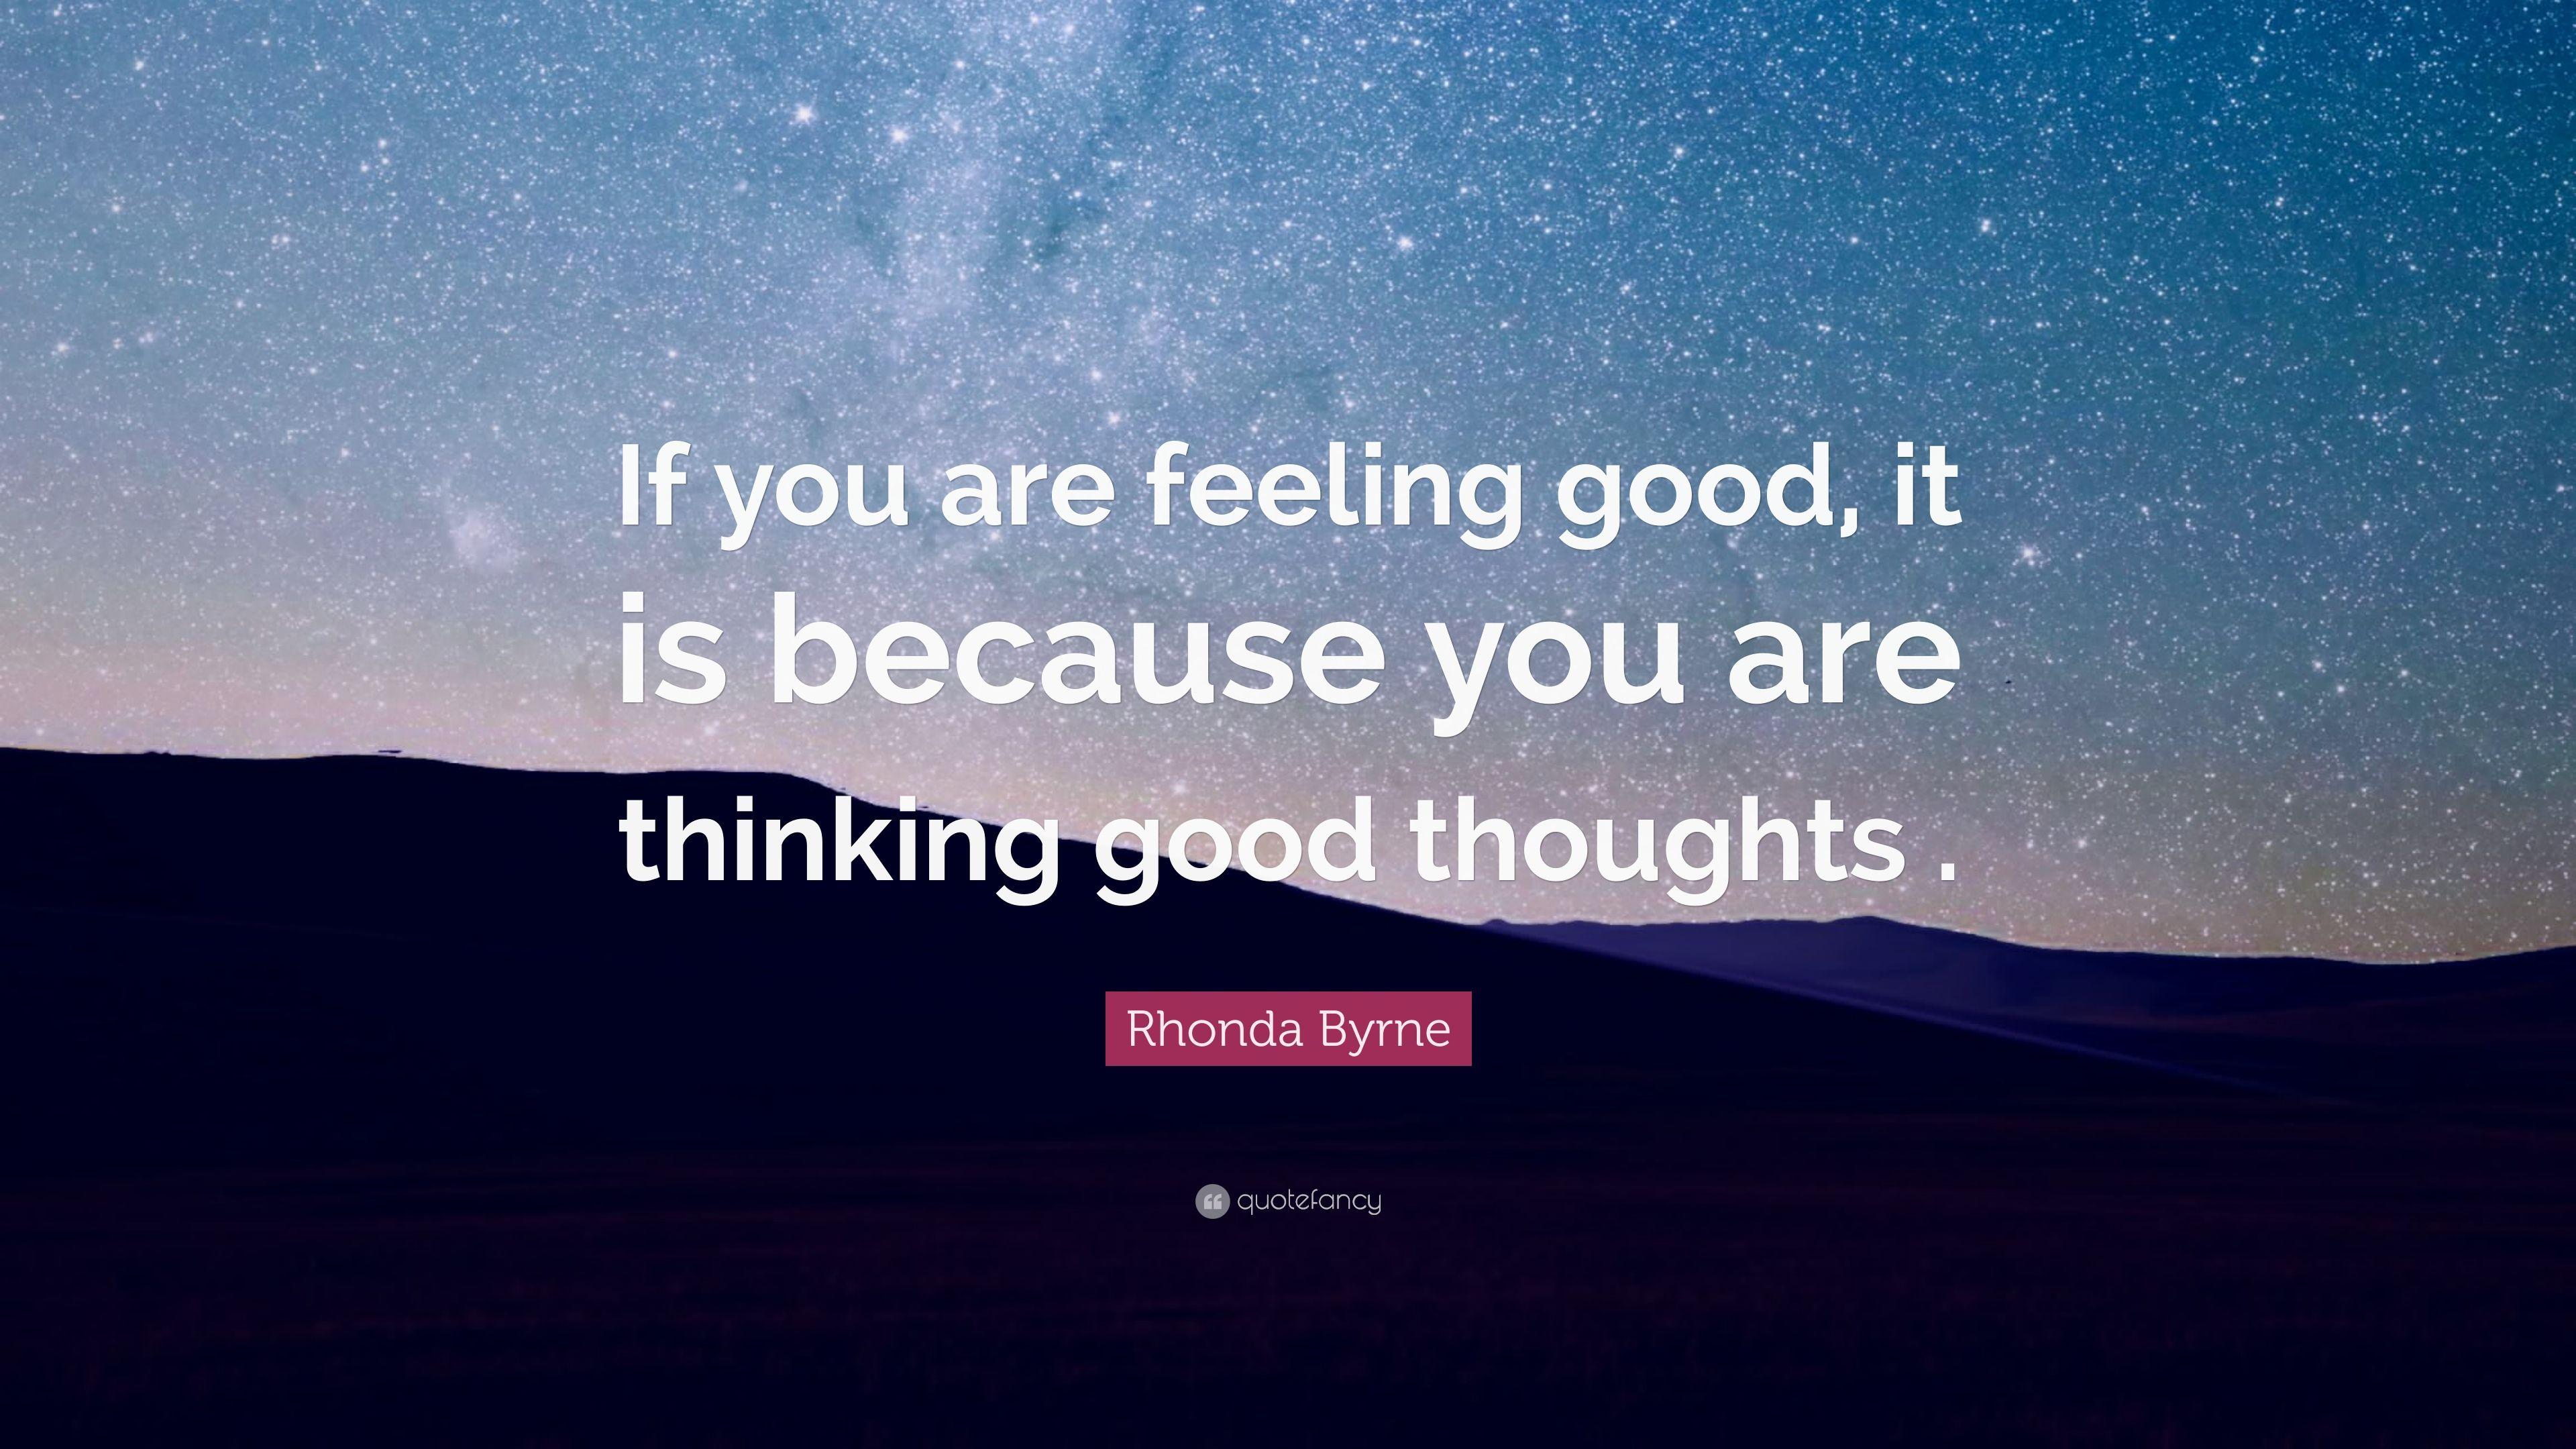 Rhonda Byrne Quote: “If you are feeling good, it is because you are thinking good thoughts .” (12 wallpaper)